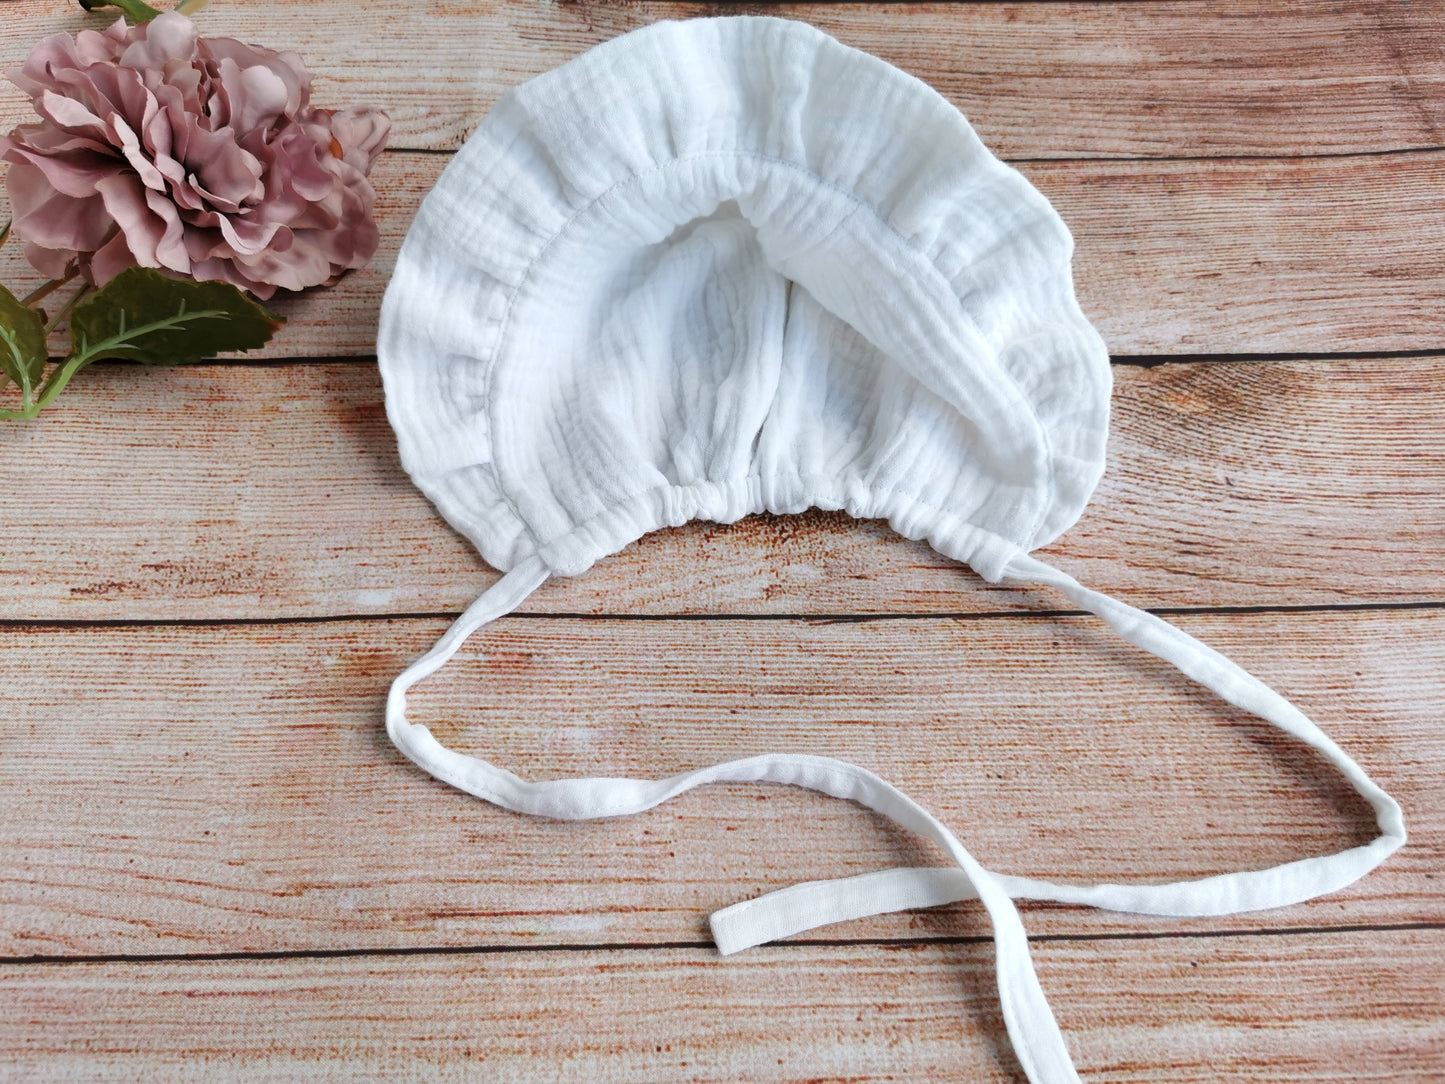 Muslin 2 layer baby summer bonnet with ruffle and ties - White